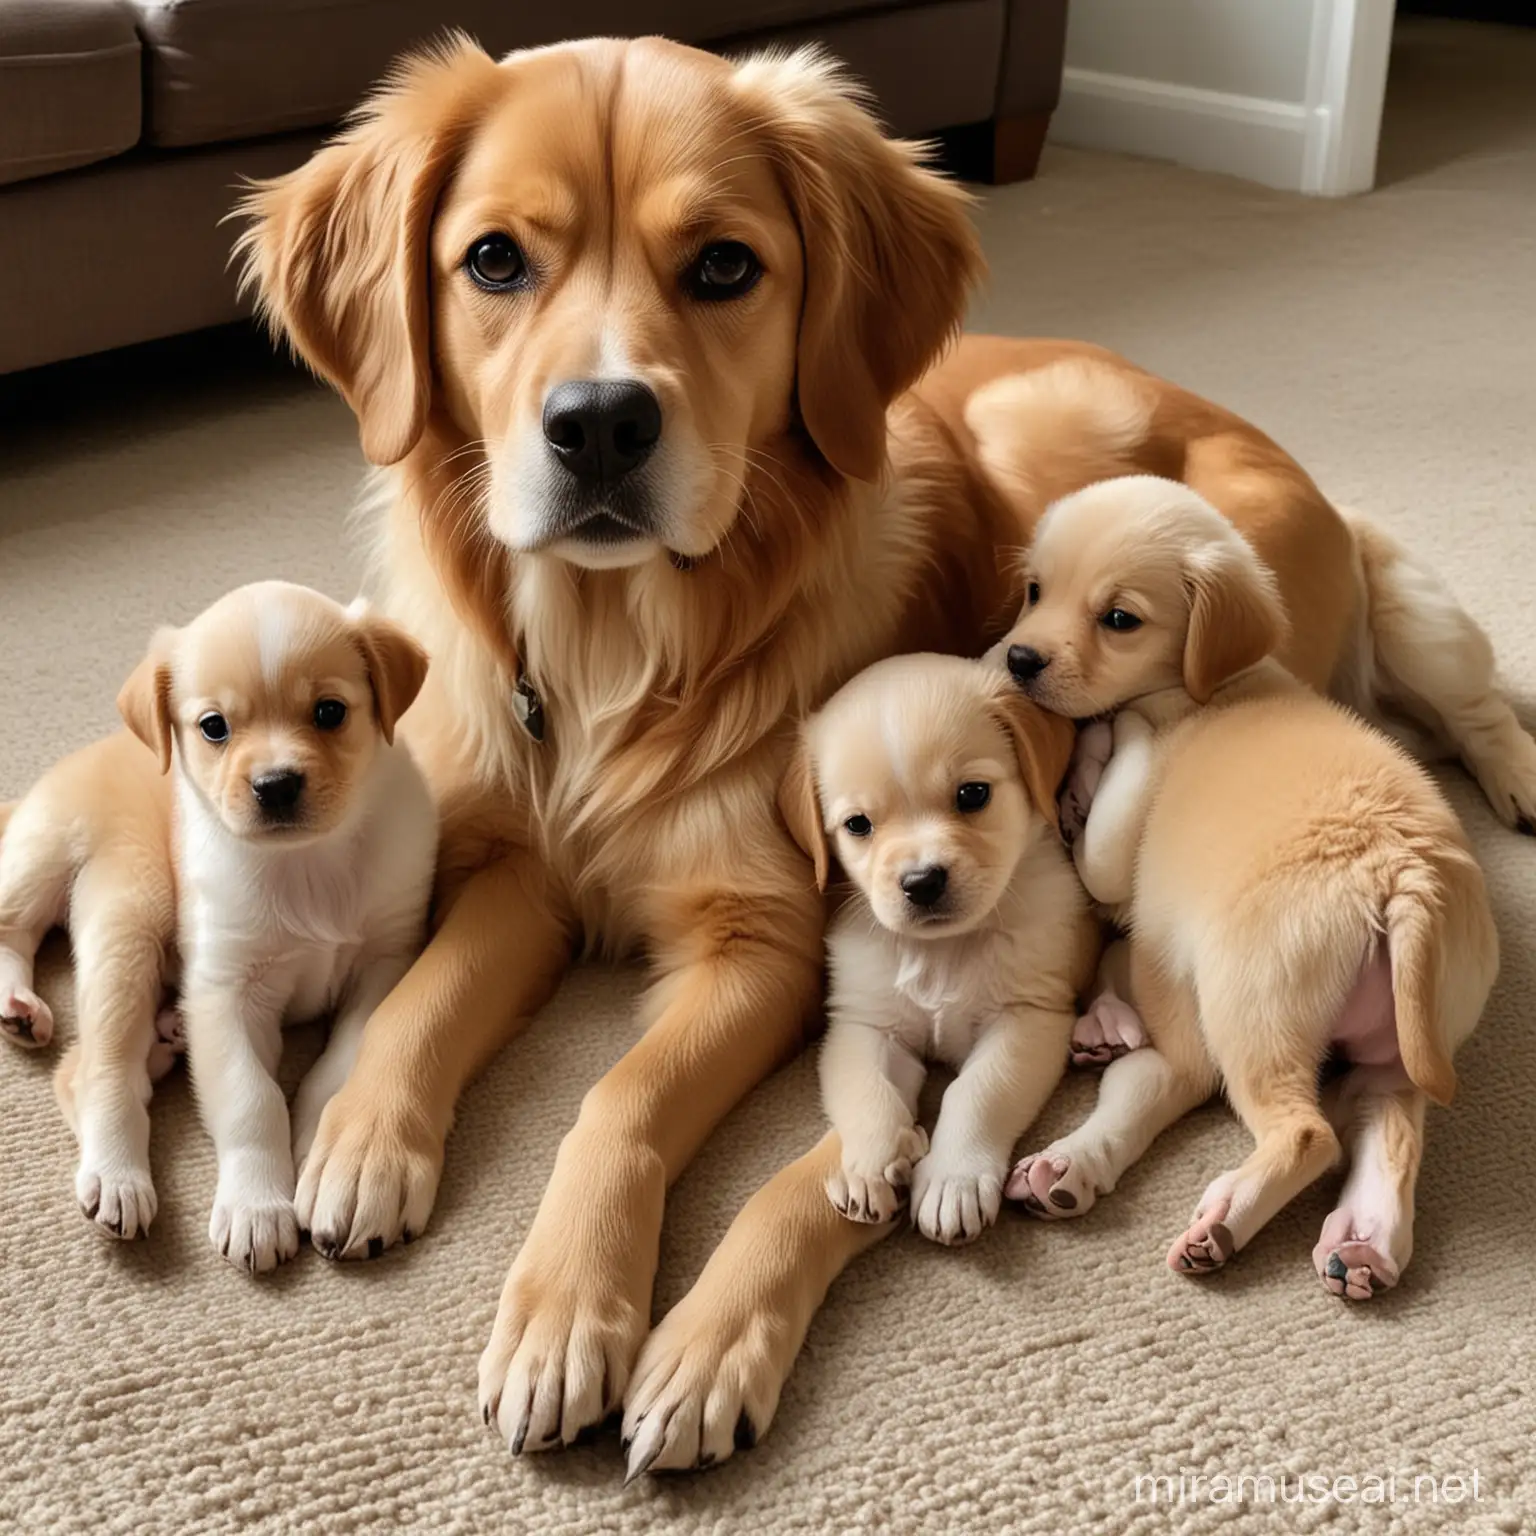 A realistic picture of a dog with puppies, let it be cute
